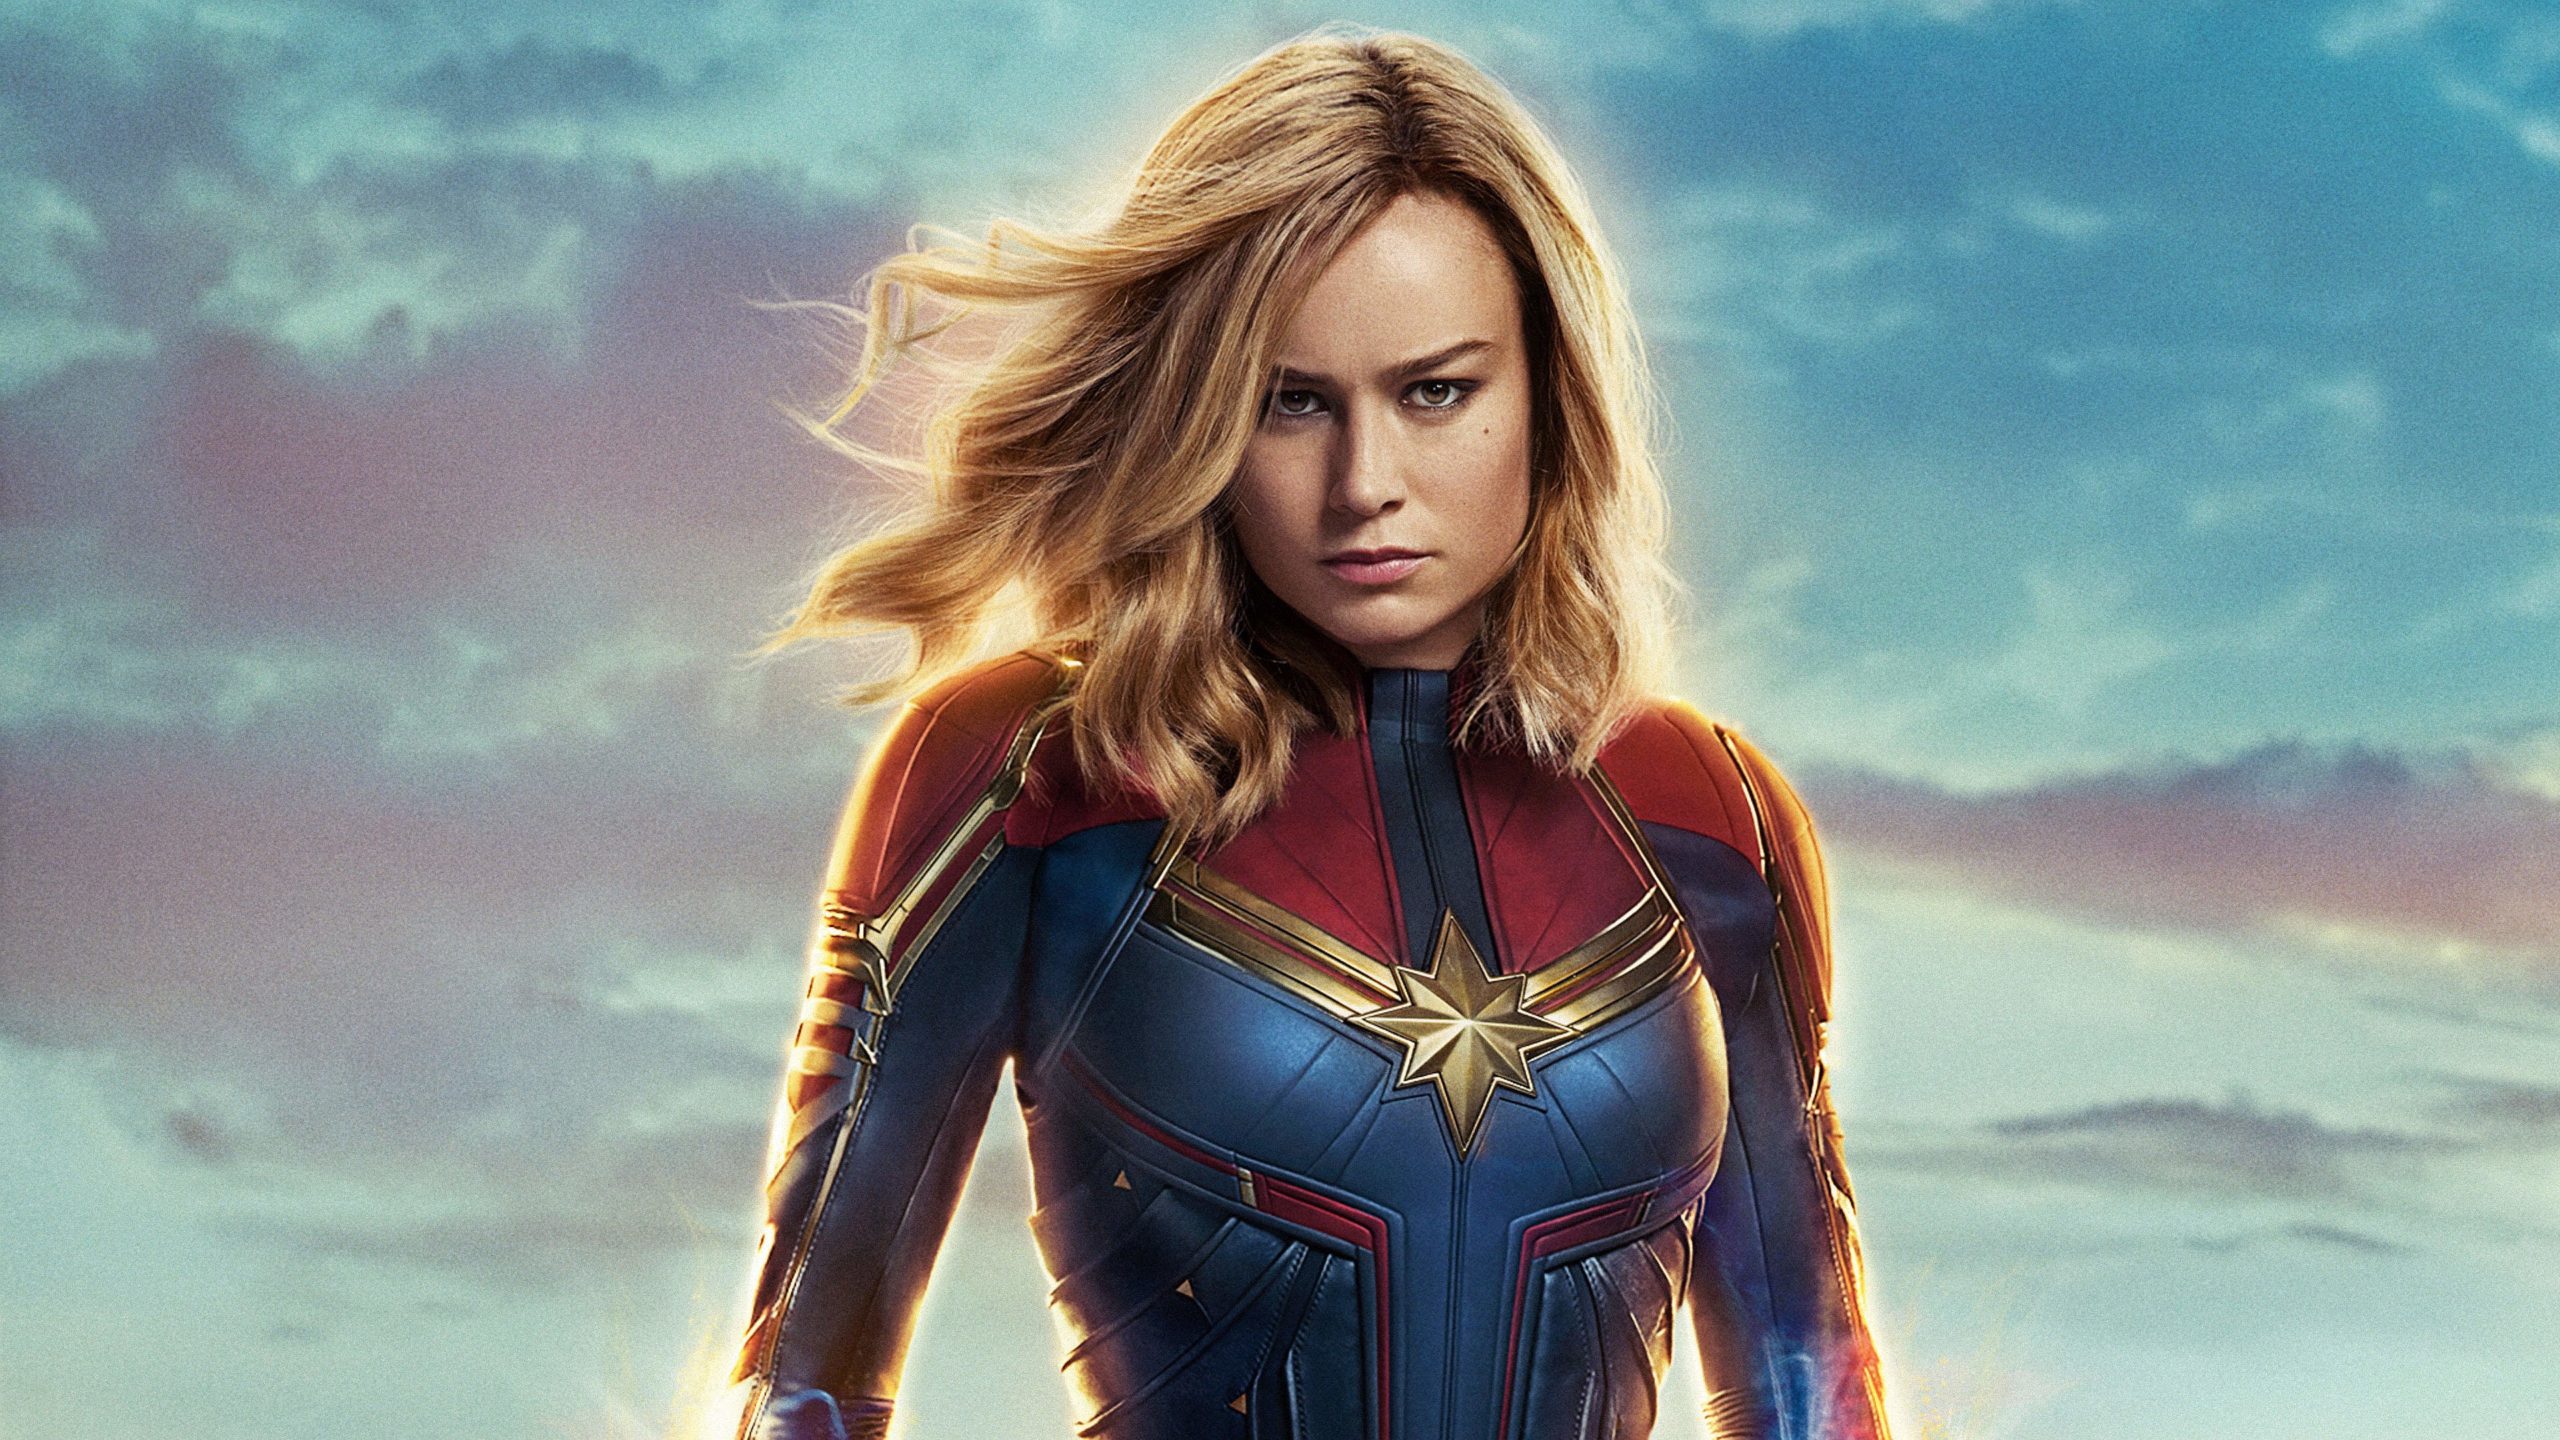 One of the female versions of the Marvel superheroes: Captain Marvel.